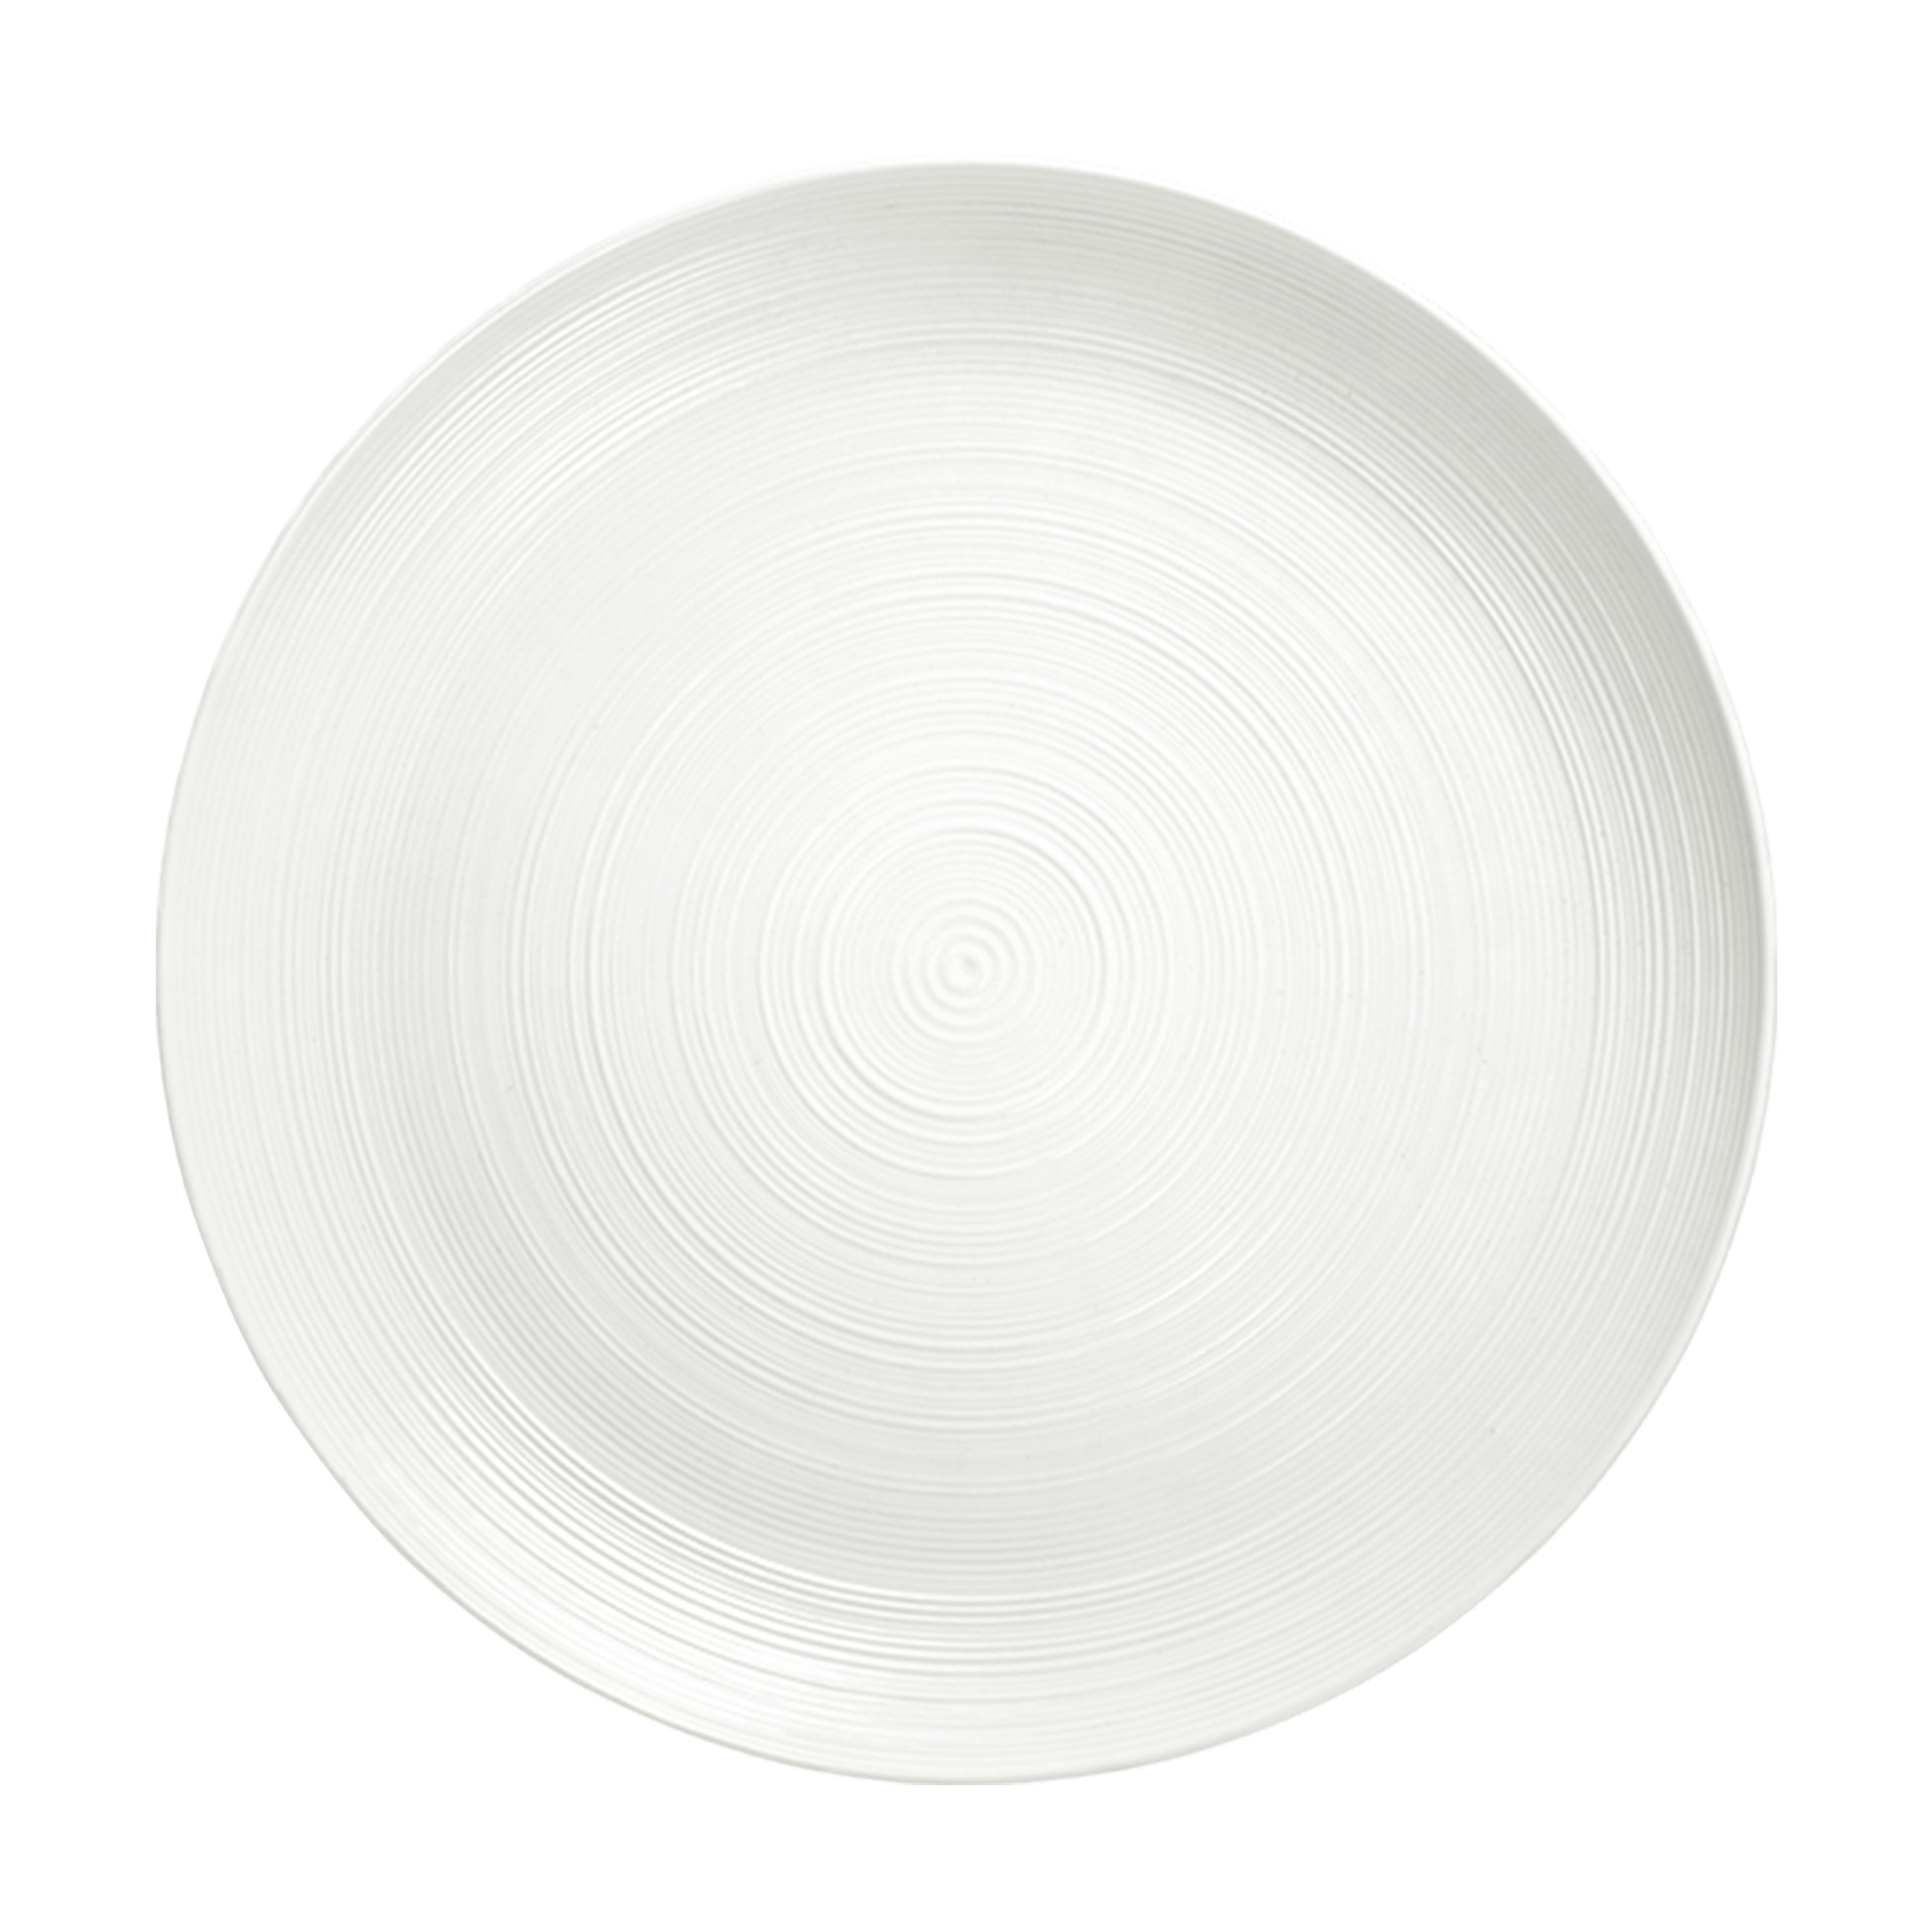 American Conventional Plate & Bowl Sets, White, 12-piece set slideshow image 4